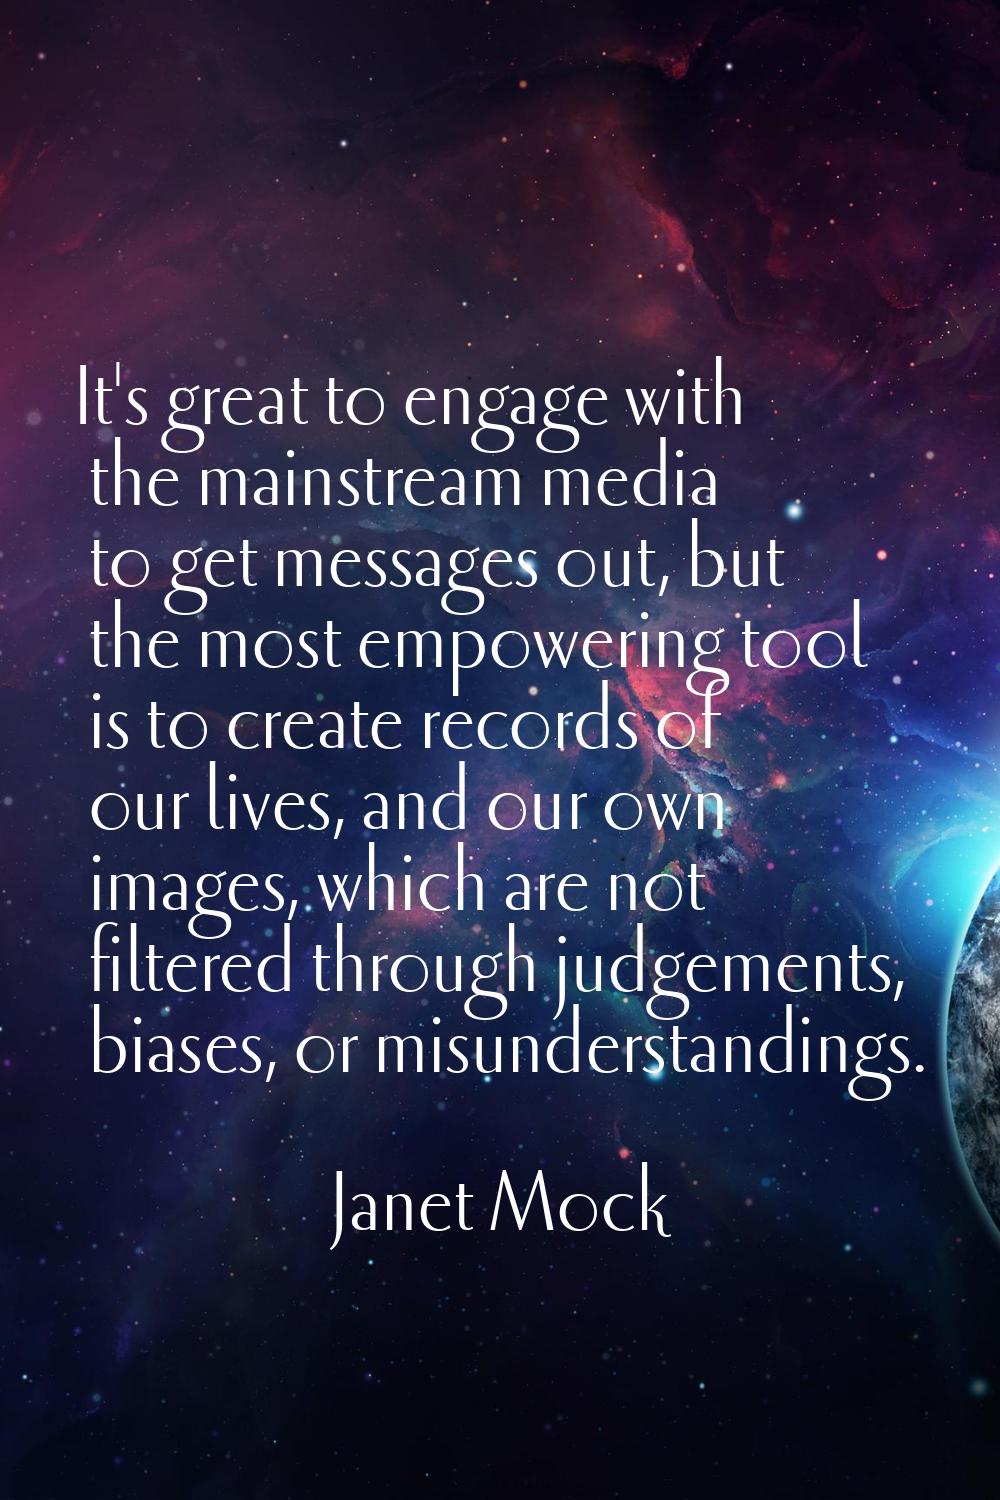 It's great to engage with the mainstream media to get messages out, but the most empowering tool is